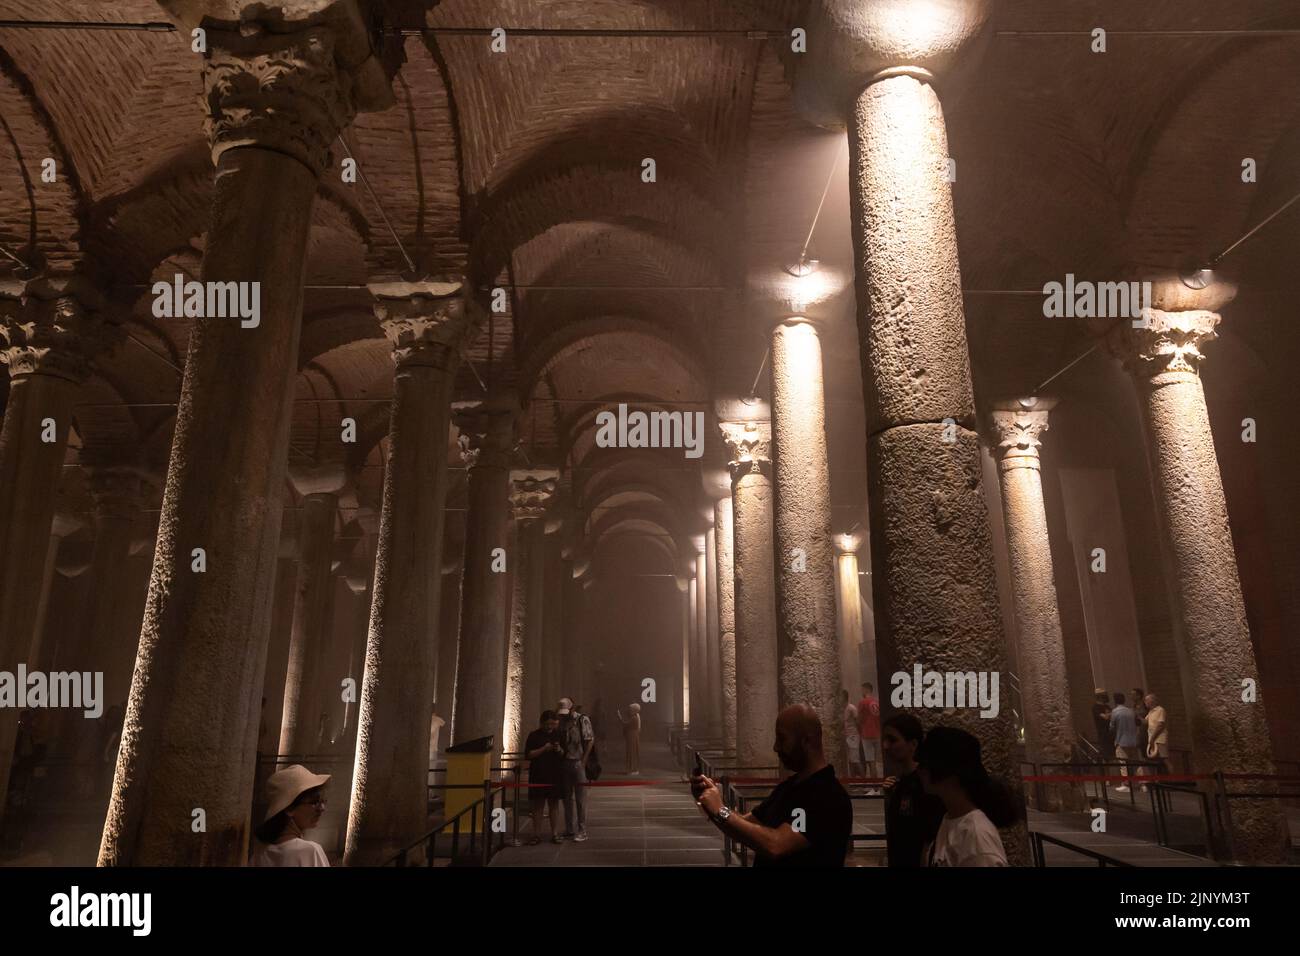 Columns of the Basilica Cistern or Yerebatan Sarnici. Travel to Istanbul background photo. Noise and grain included. Selective focus. Istanbul Turkey Stock Photo